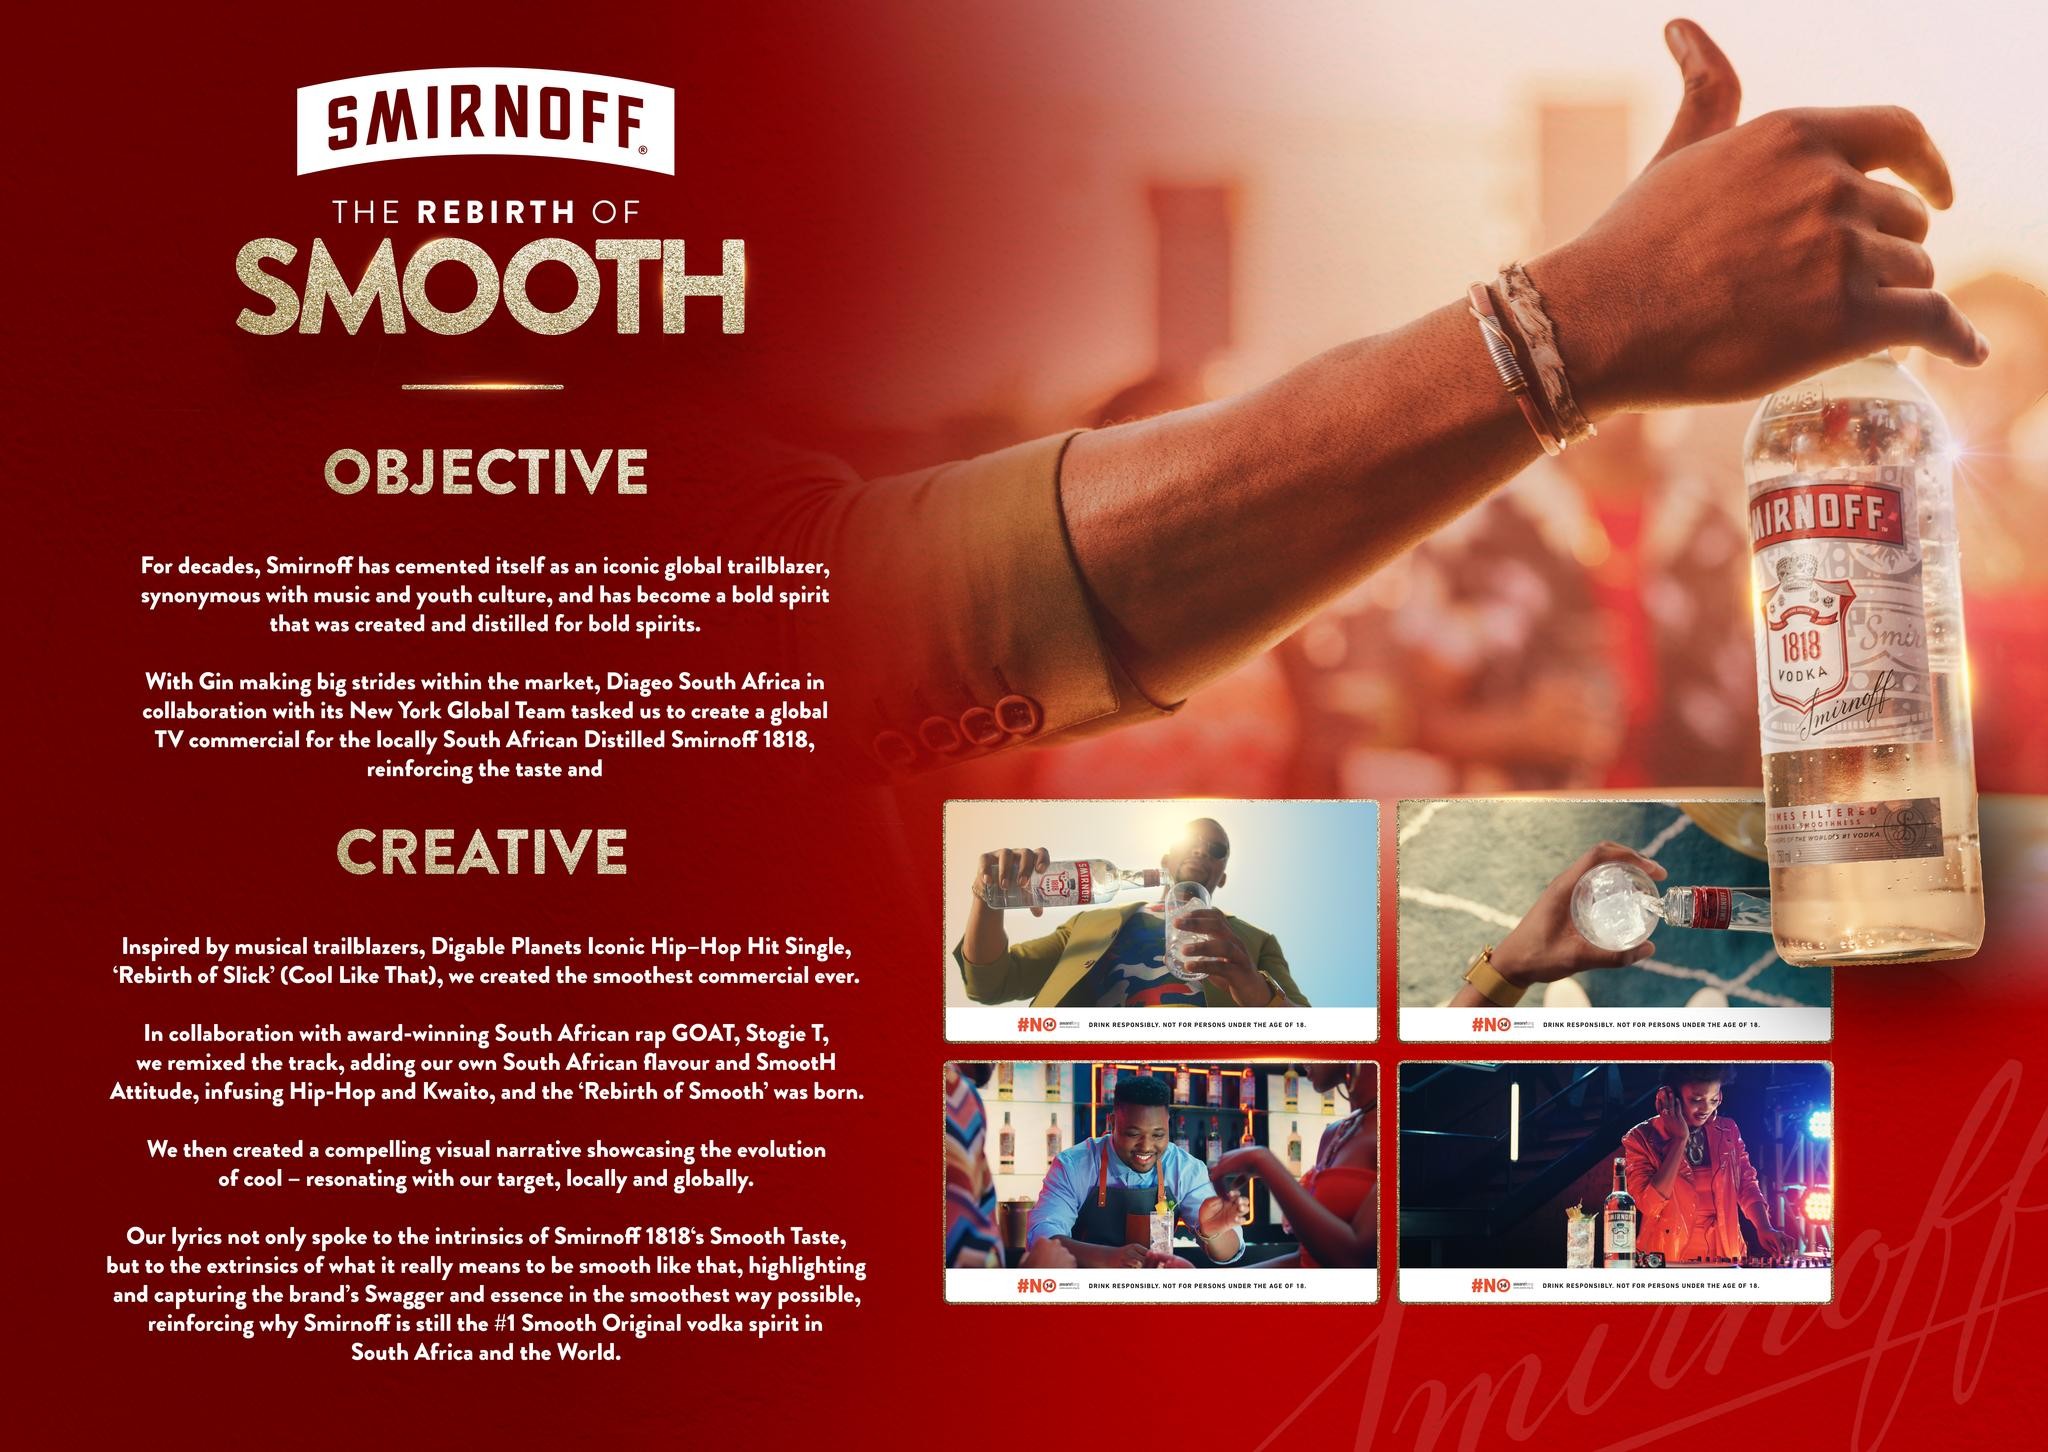 The Rebirth of Smooth